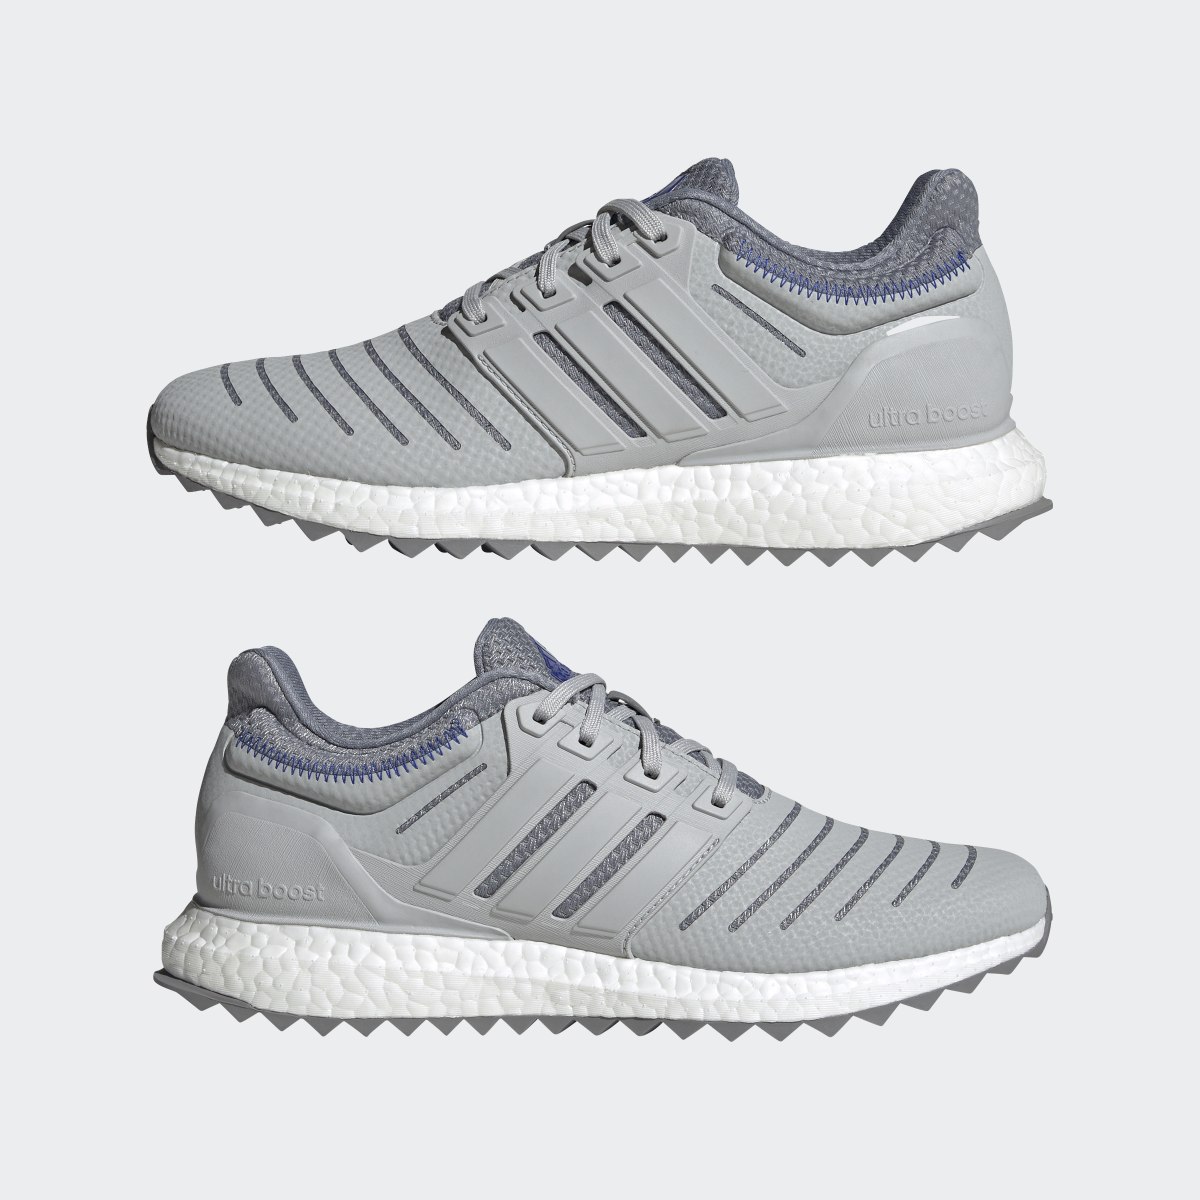 Adidas Chaussure Ultraboost DNA XXII Lifestyle Running Sportswear Capsule Collection. 8